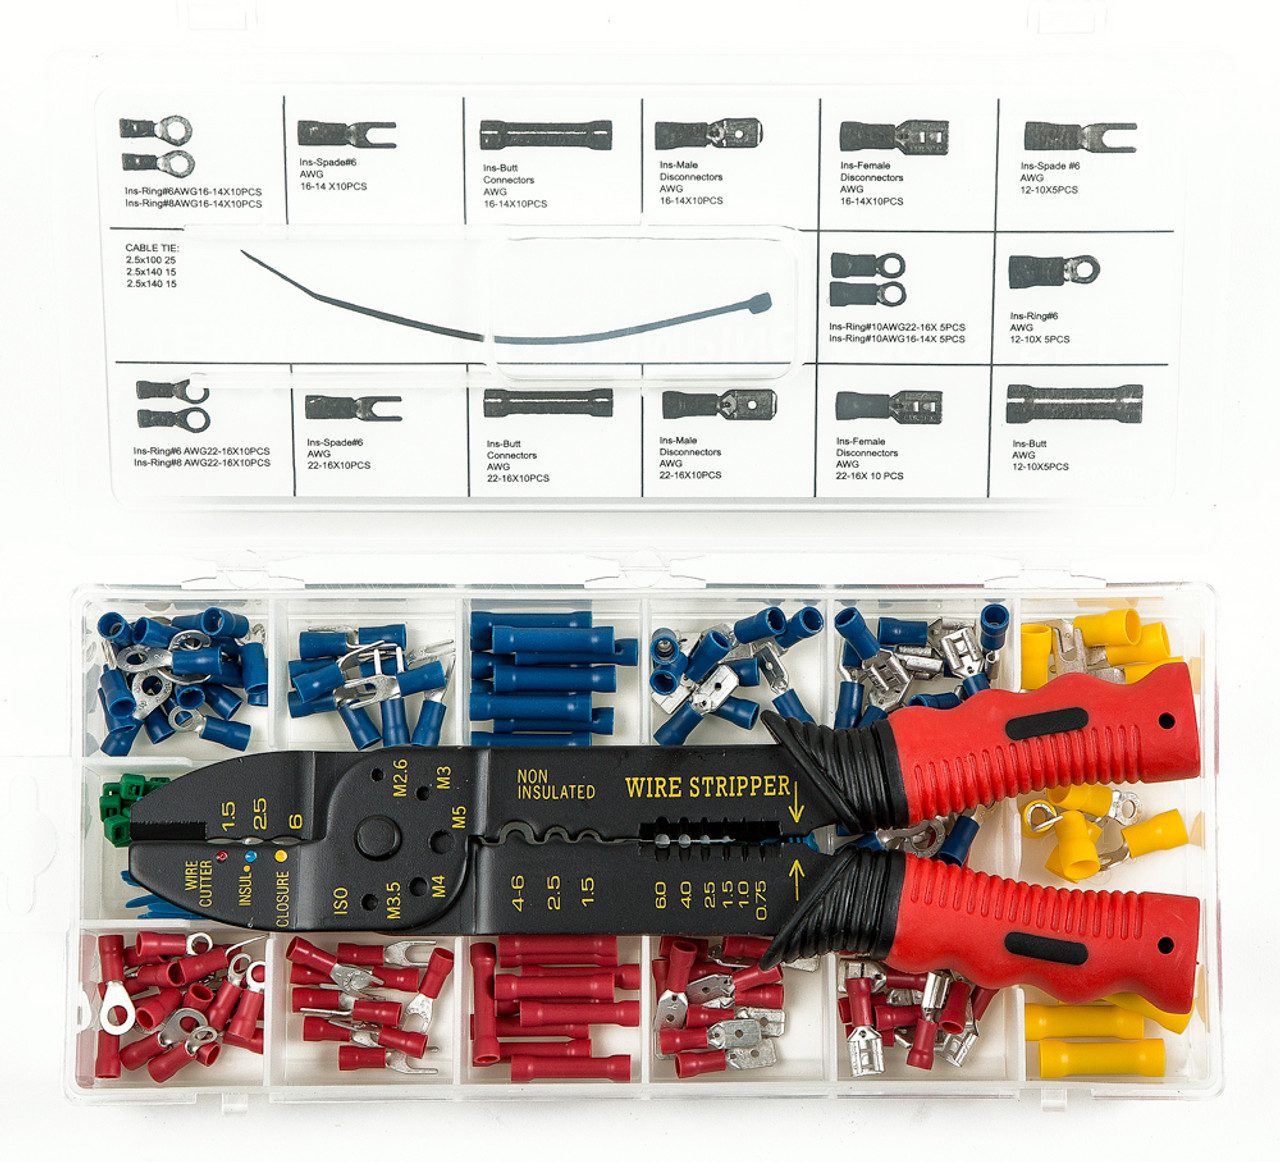 Presa Solderless Copper Wire Terminal / Connection Set with Crimper / Wire Stripping Tool, 175 Pieces